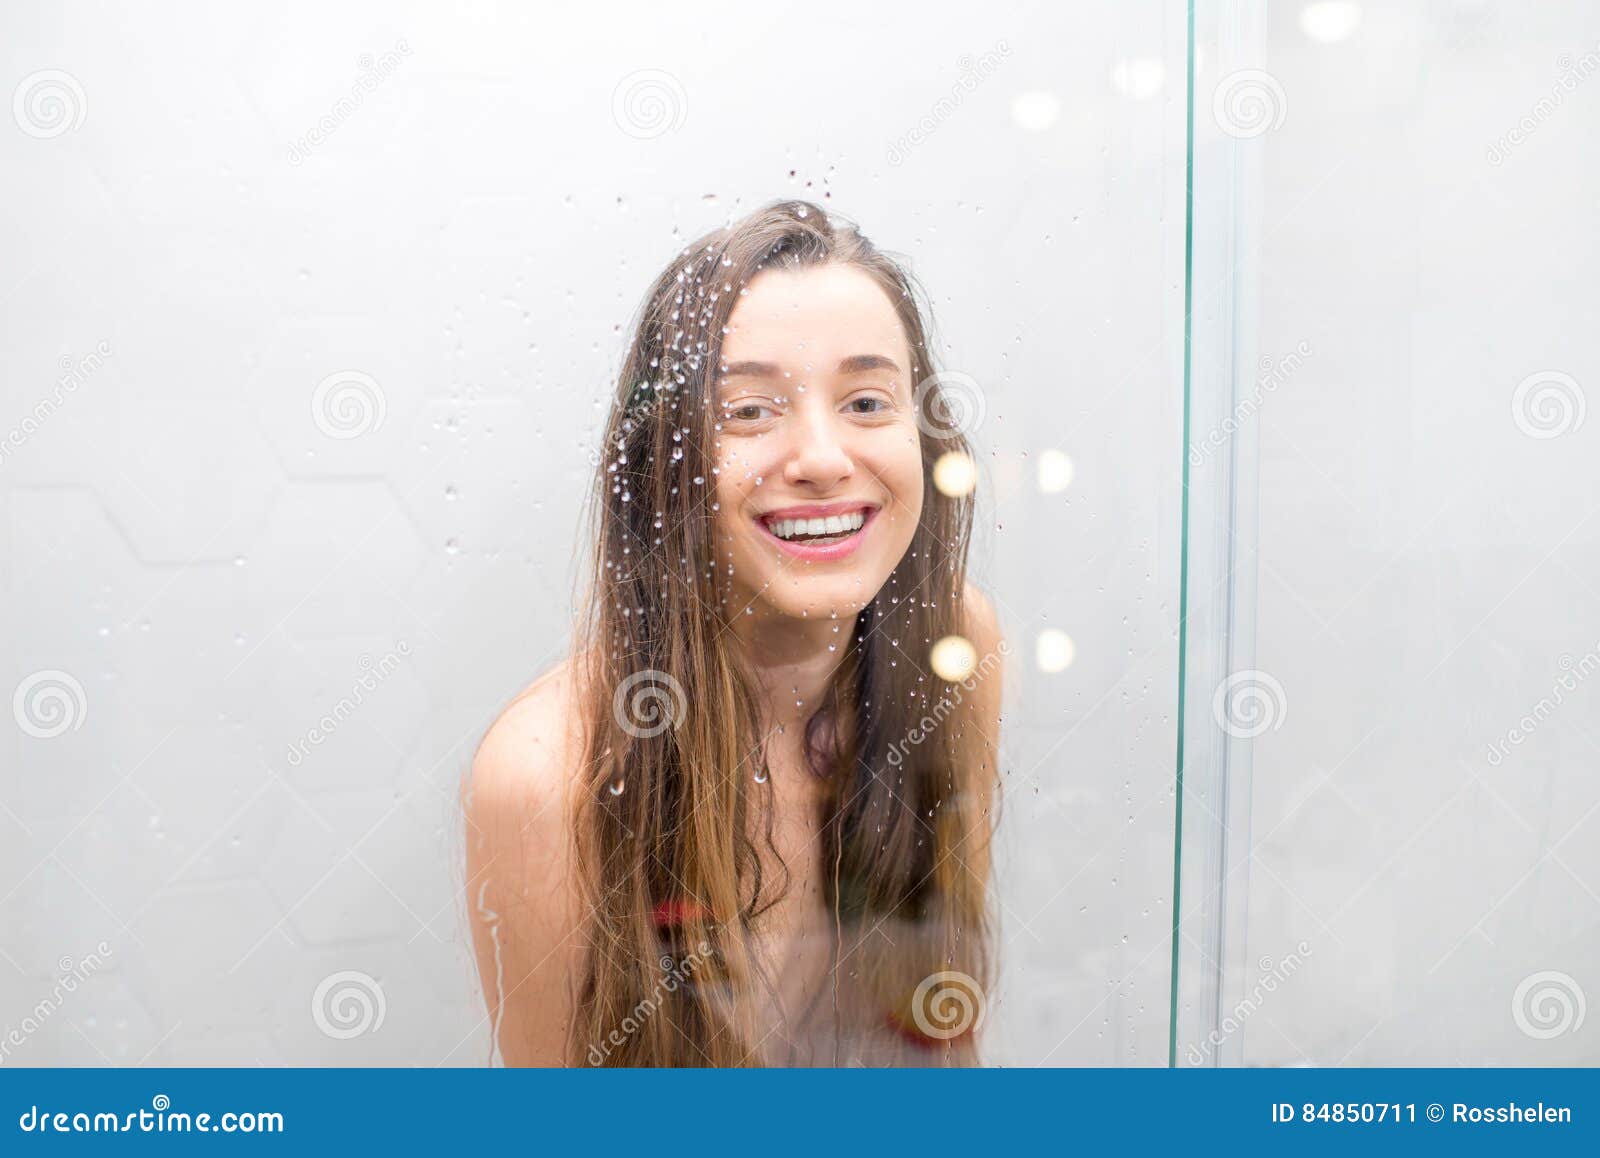 Young nude girls in the shower